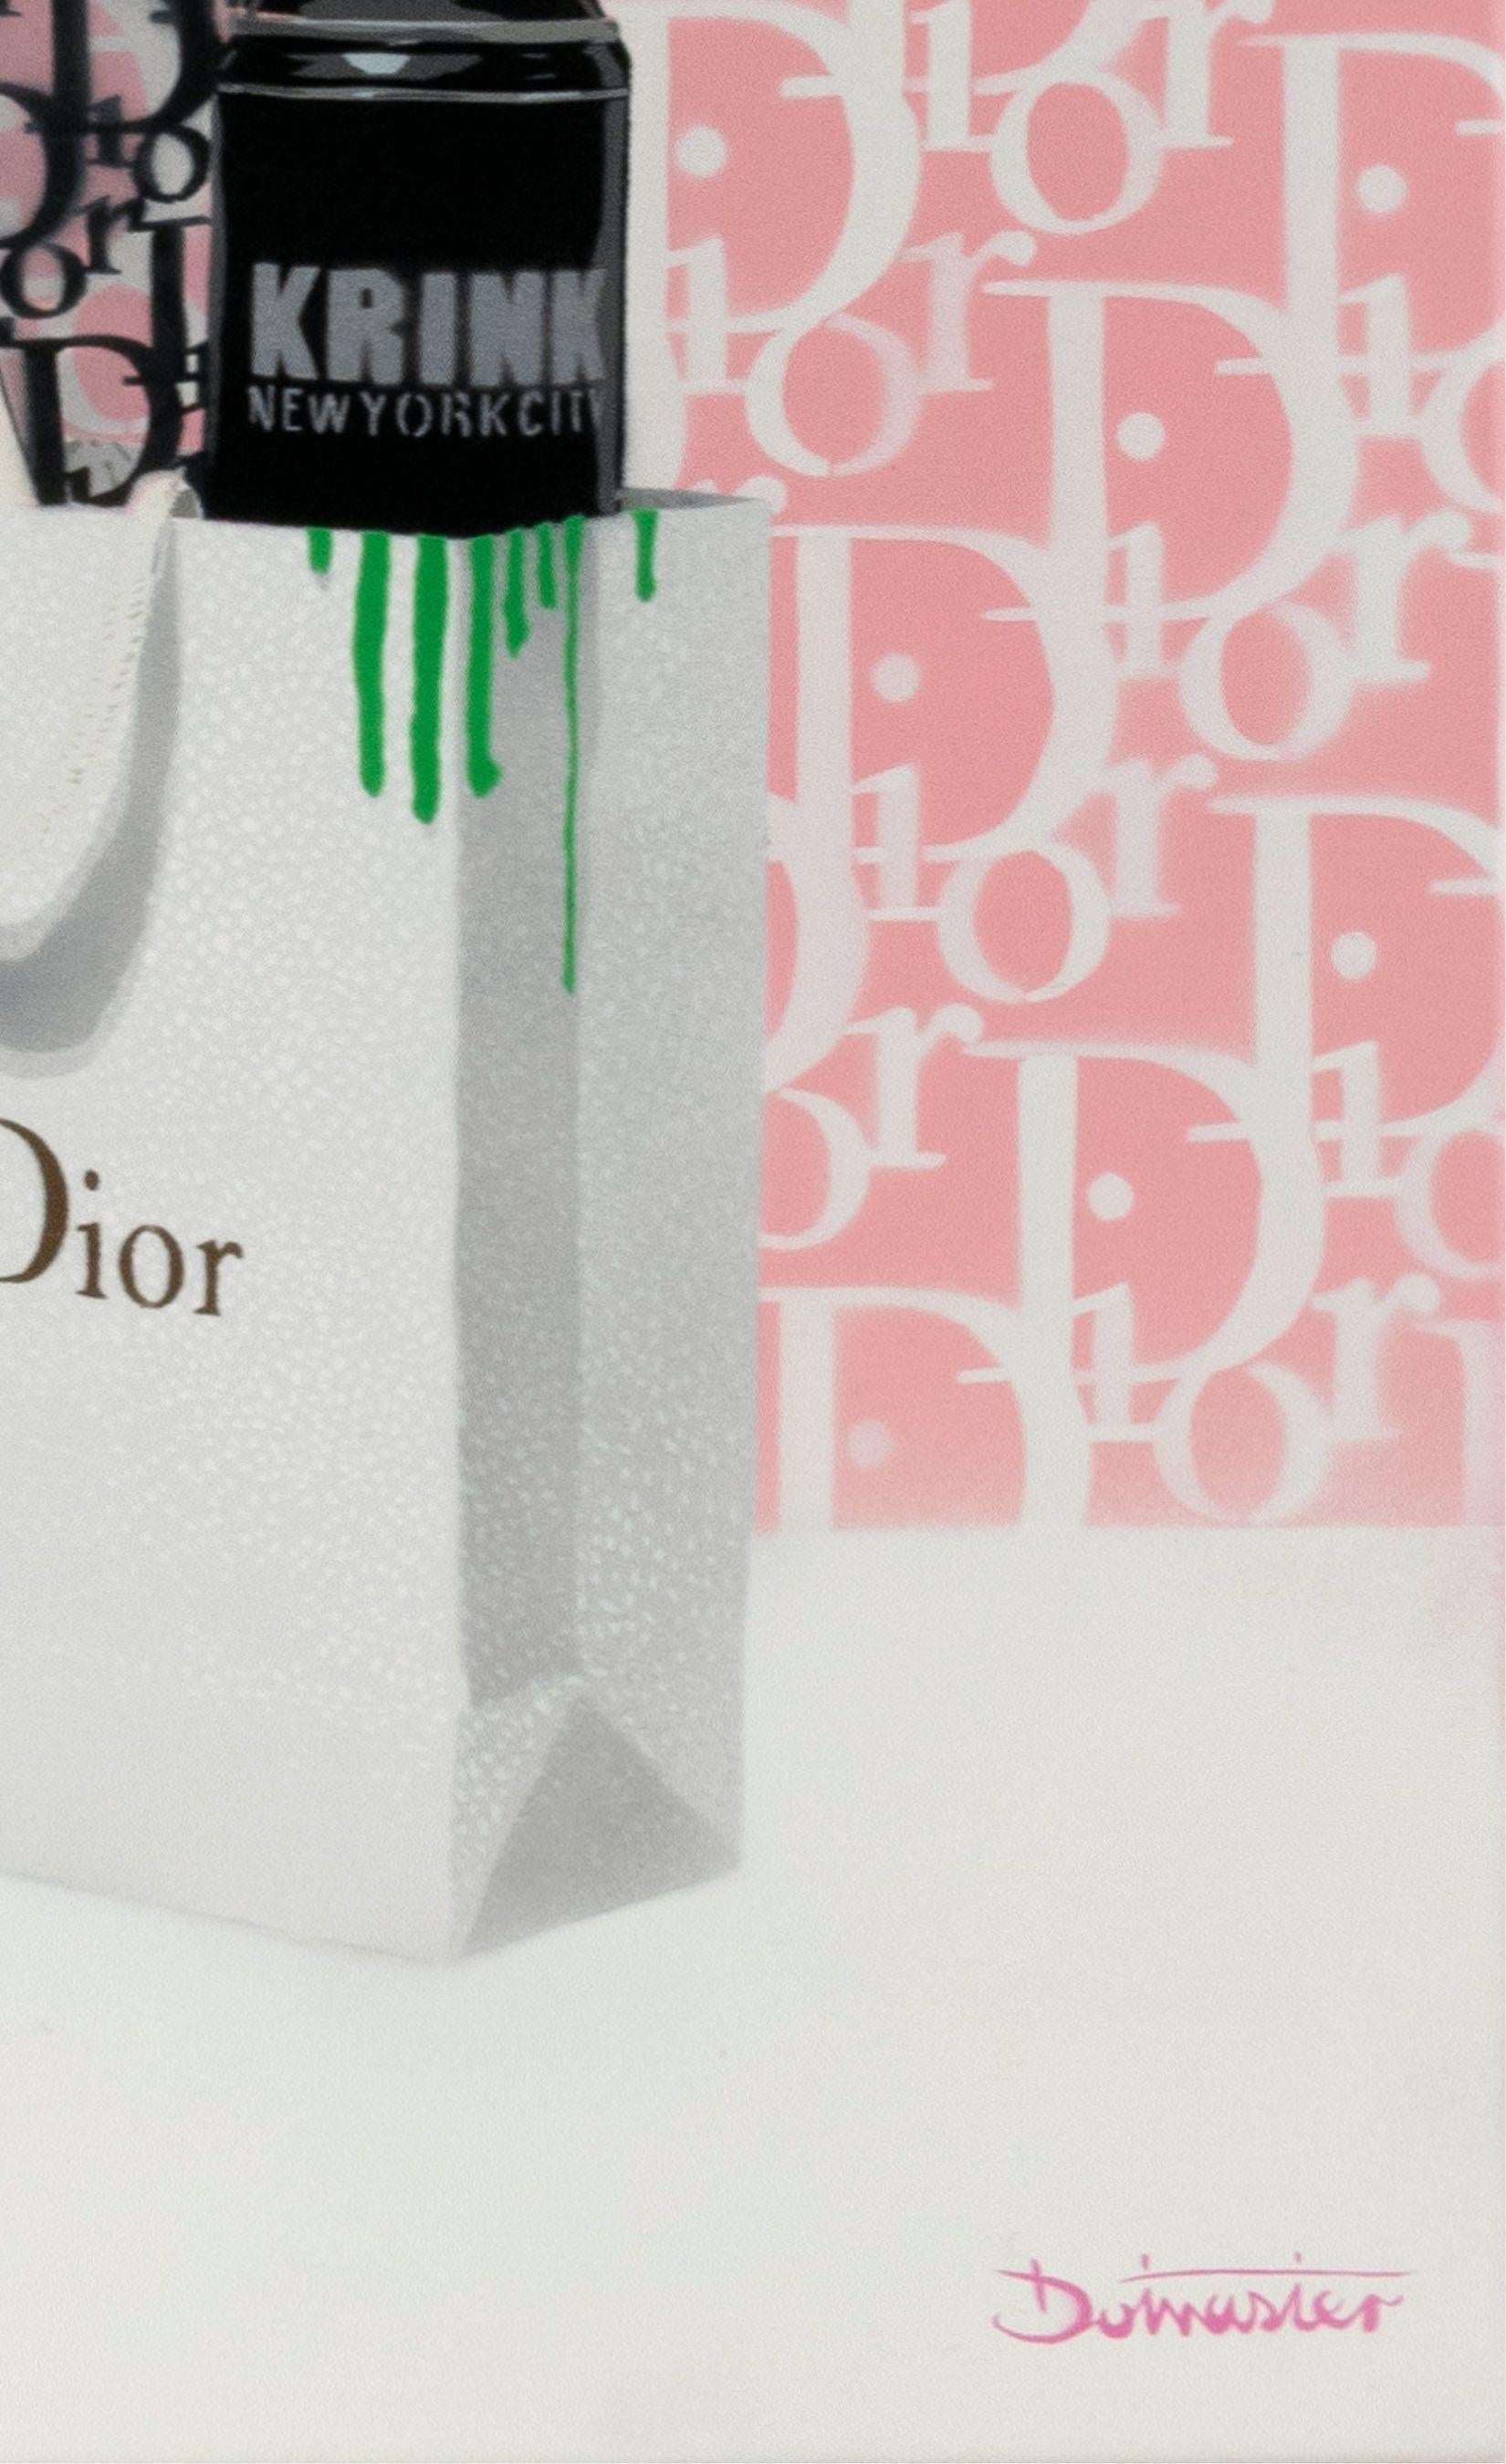 DIOR – Green Drips In The Pink - Street Art Painting by The Dotmaster